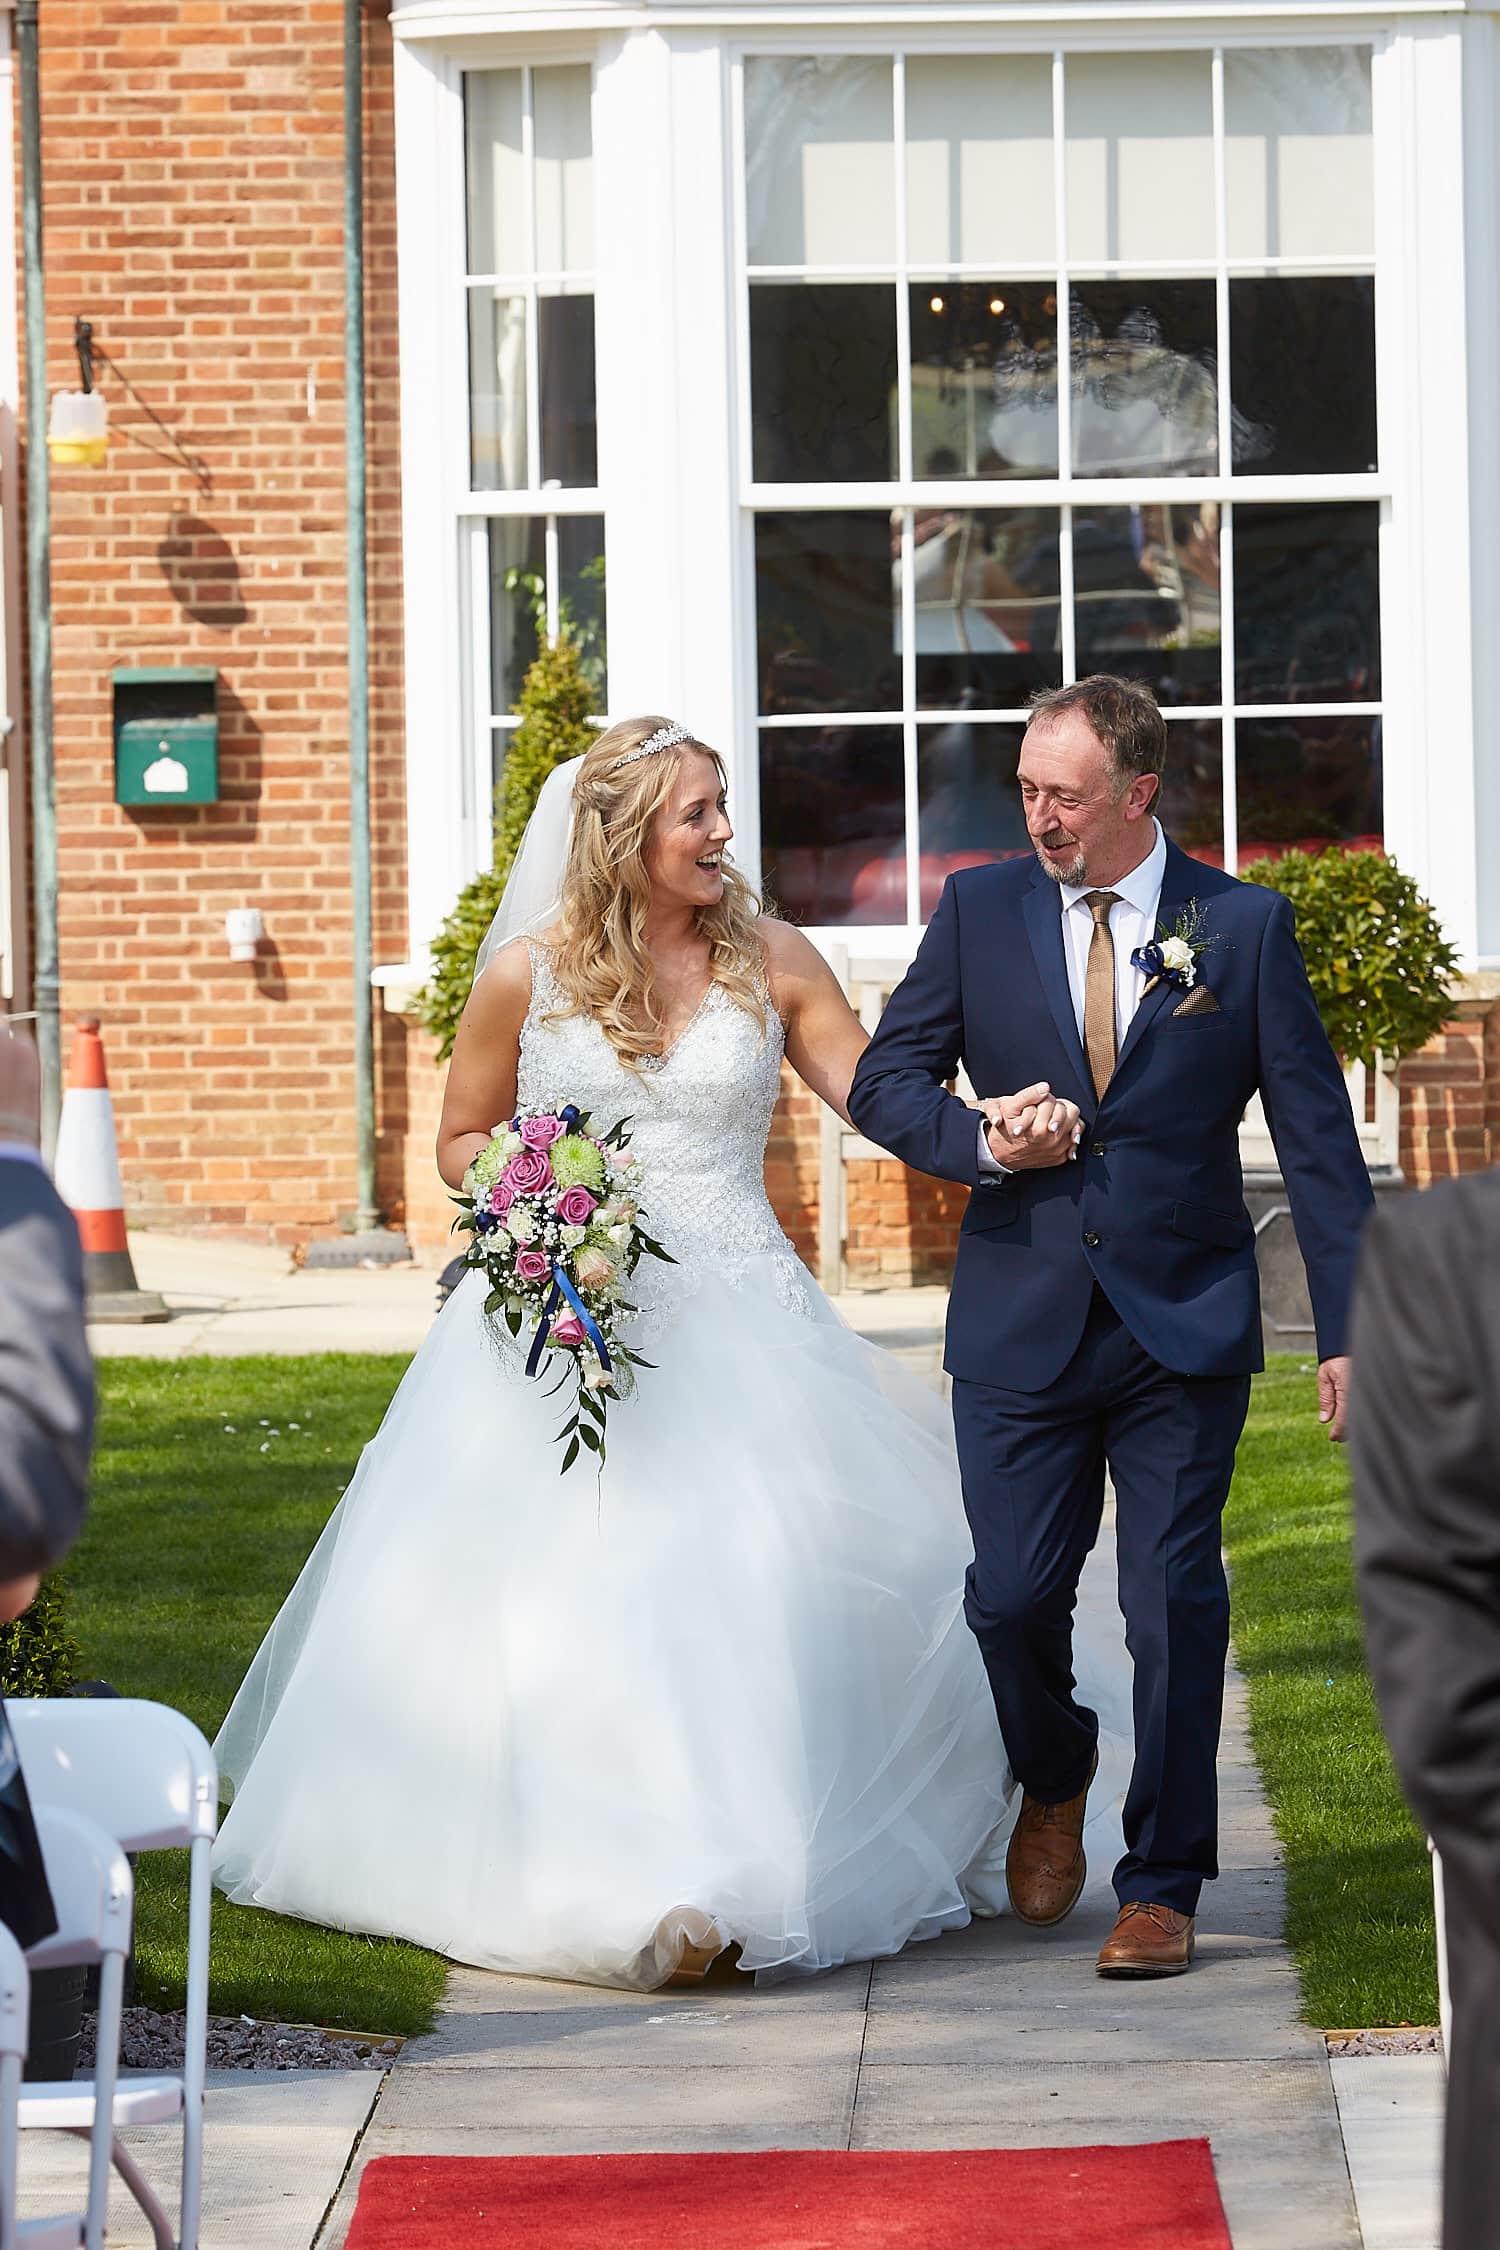 A father walks his daughter down the aisle at Kenwick Park Hotel, Louth